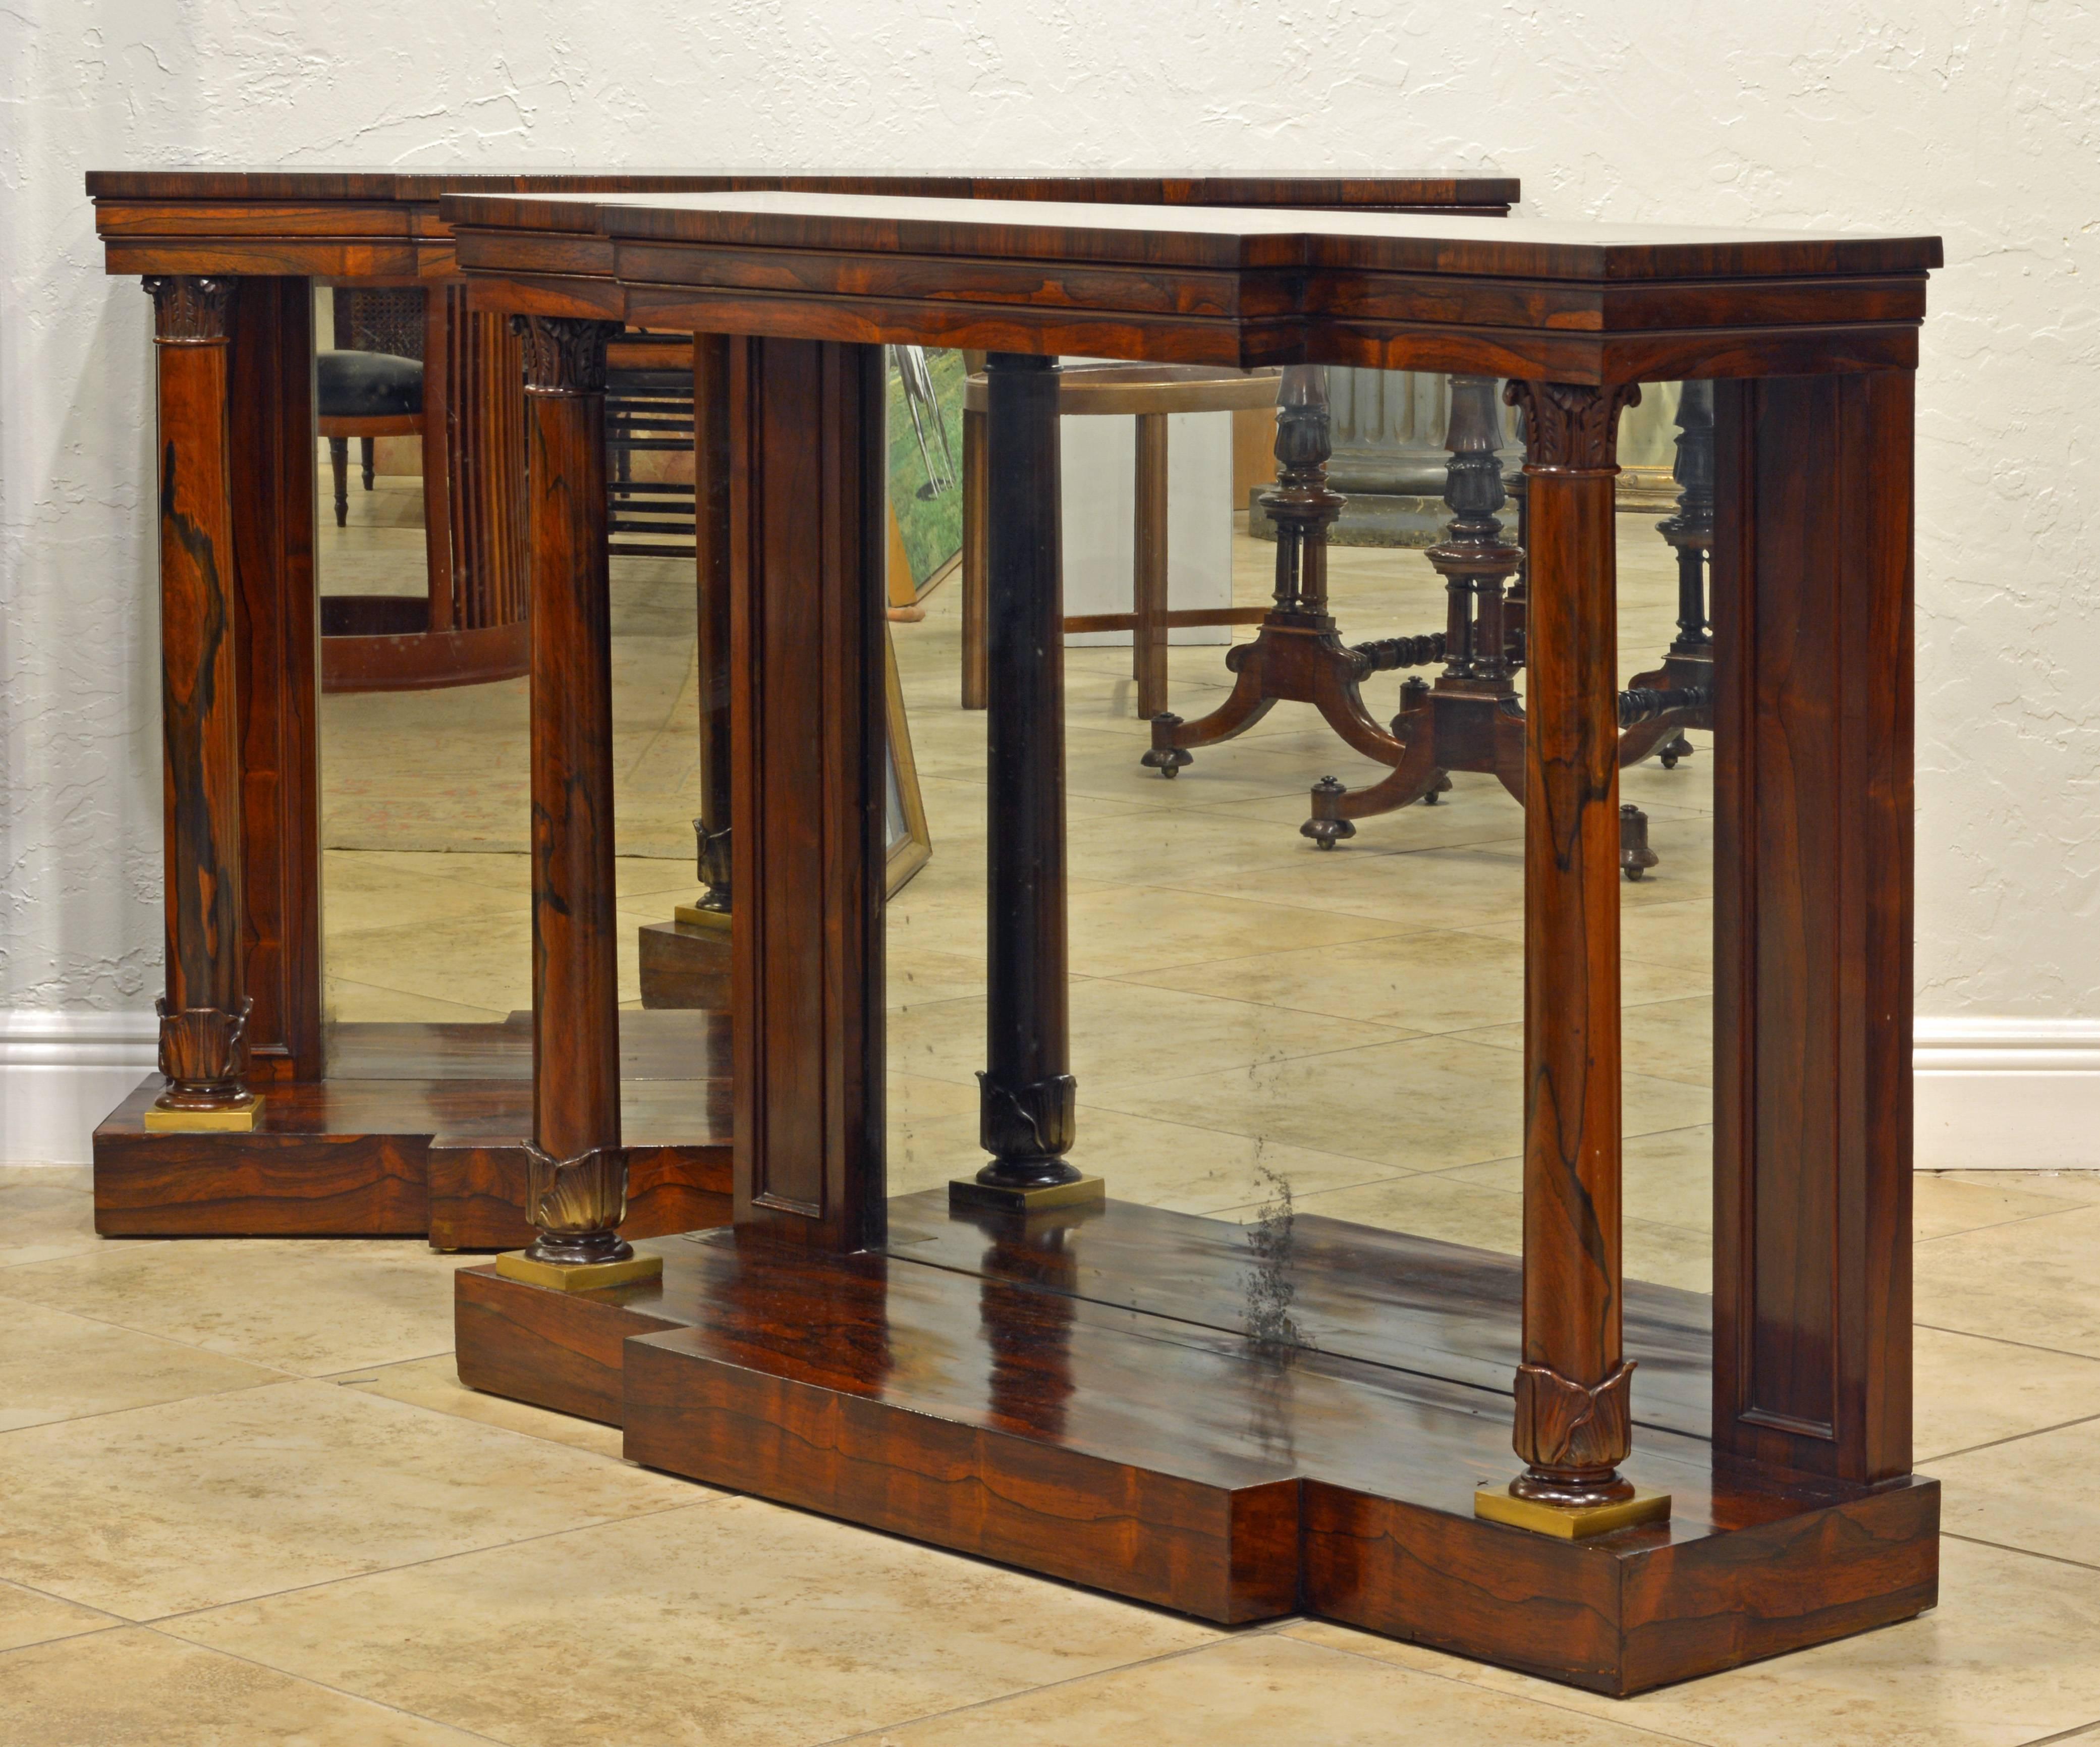 This rare pair of early 19th century Regency breakfront console tables feature string inlaid polished tops above profiled friezes resting on double columns with carved capitals and bases flanking mirrored back panels and standing on a plinth bases.